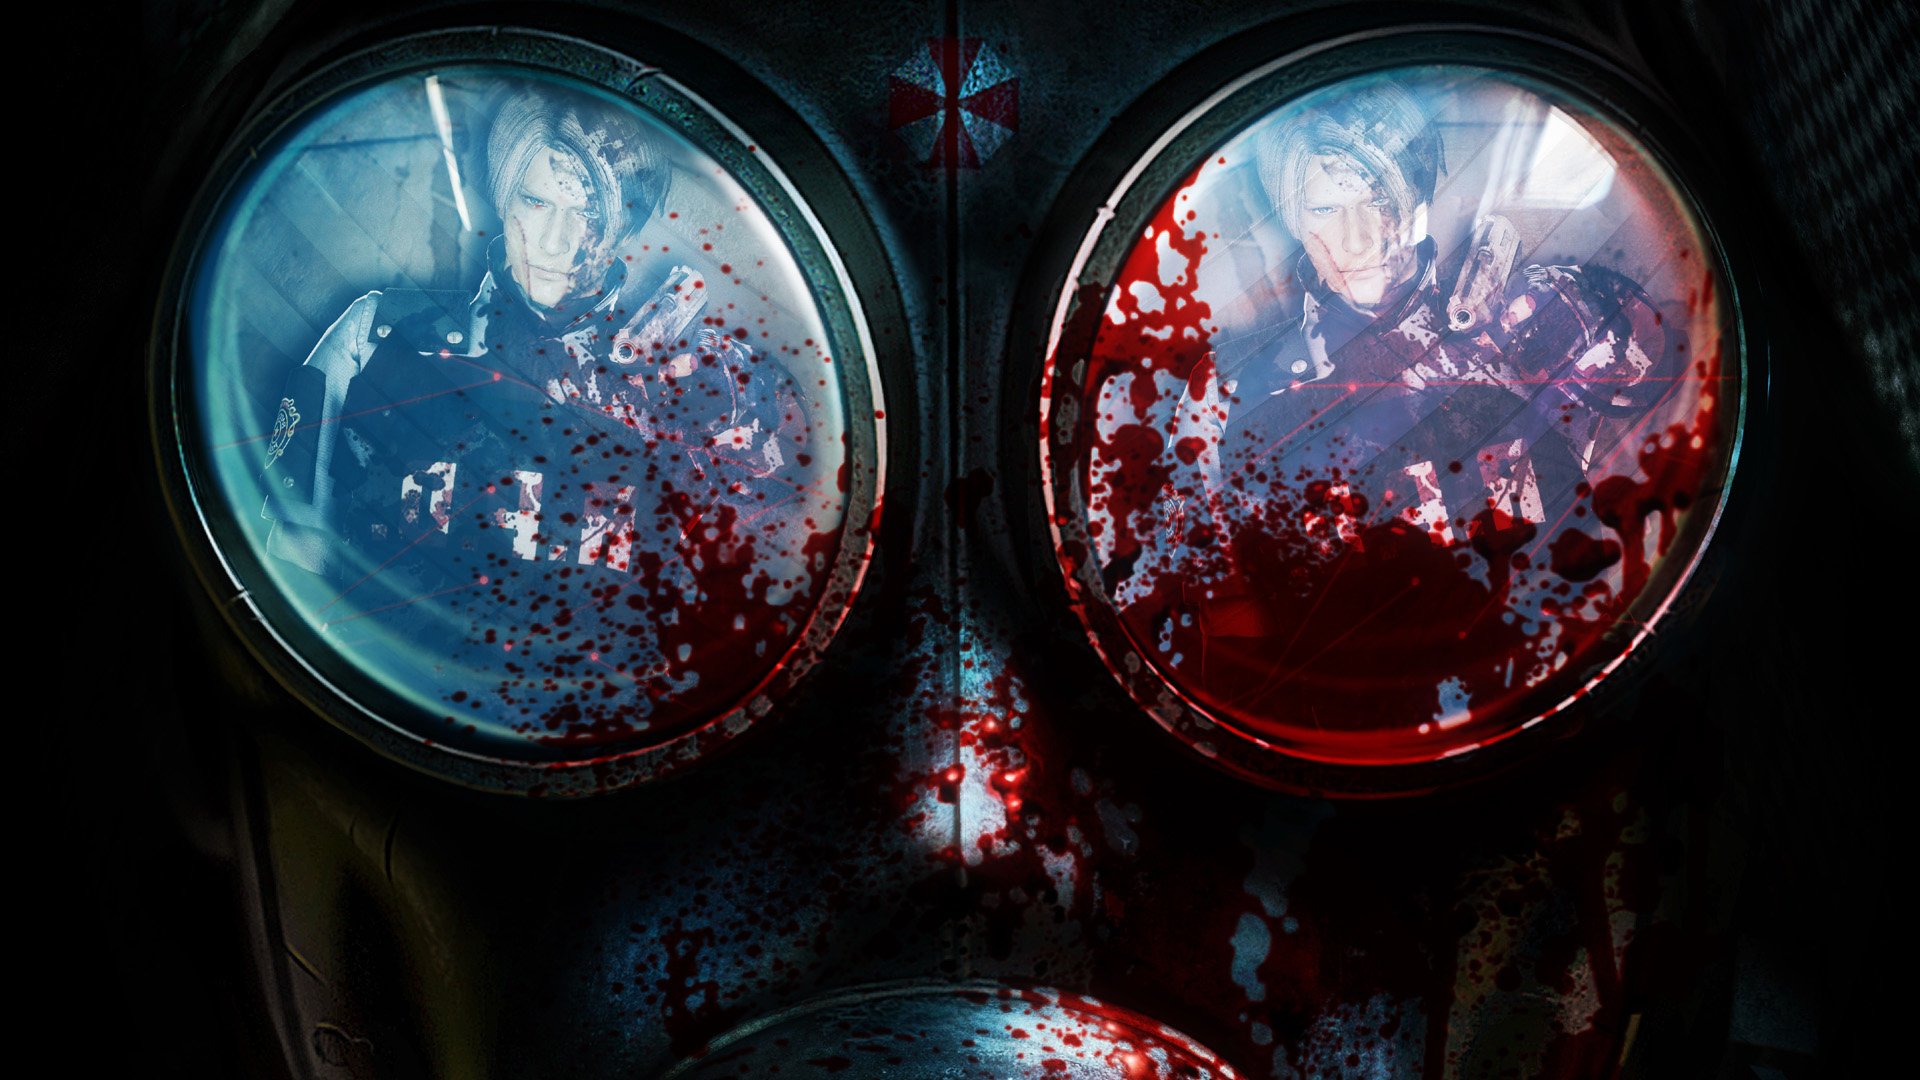 resident evil operation raccoon city wallpaper 1080p Wallpapers